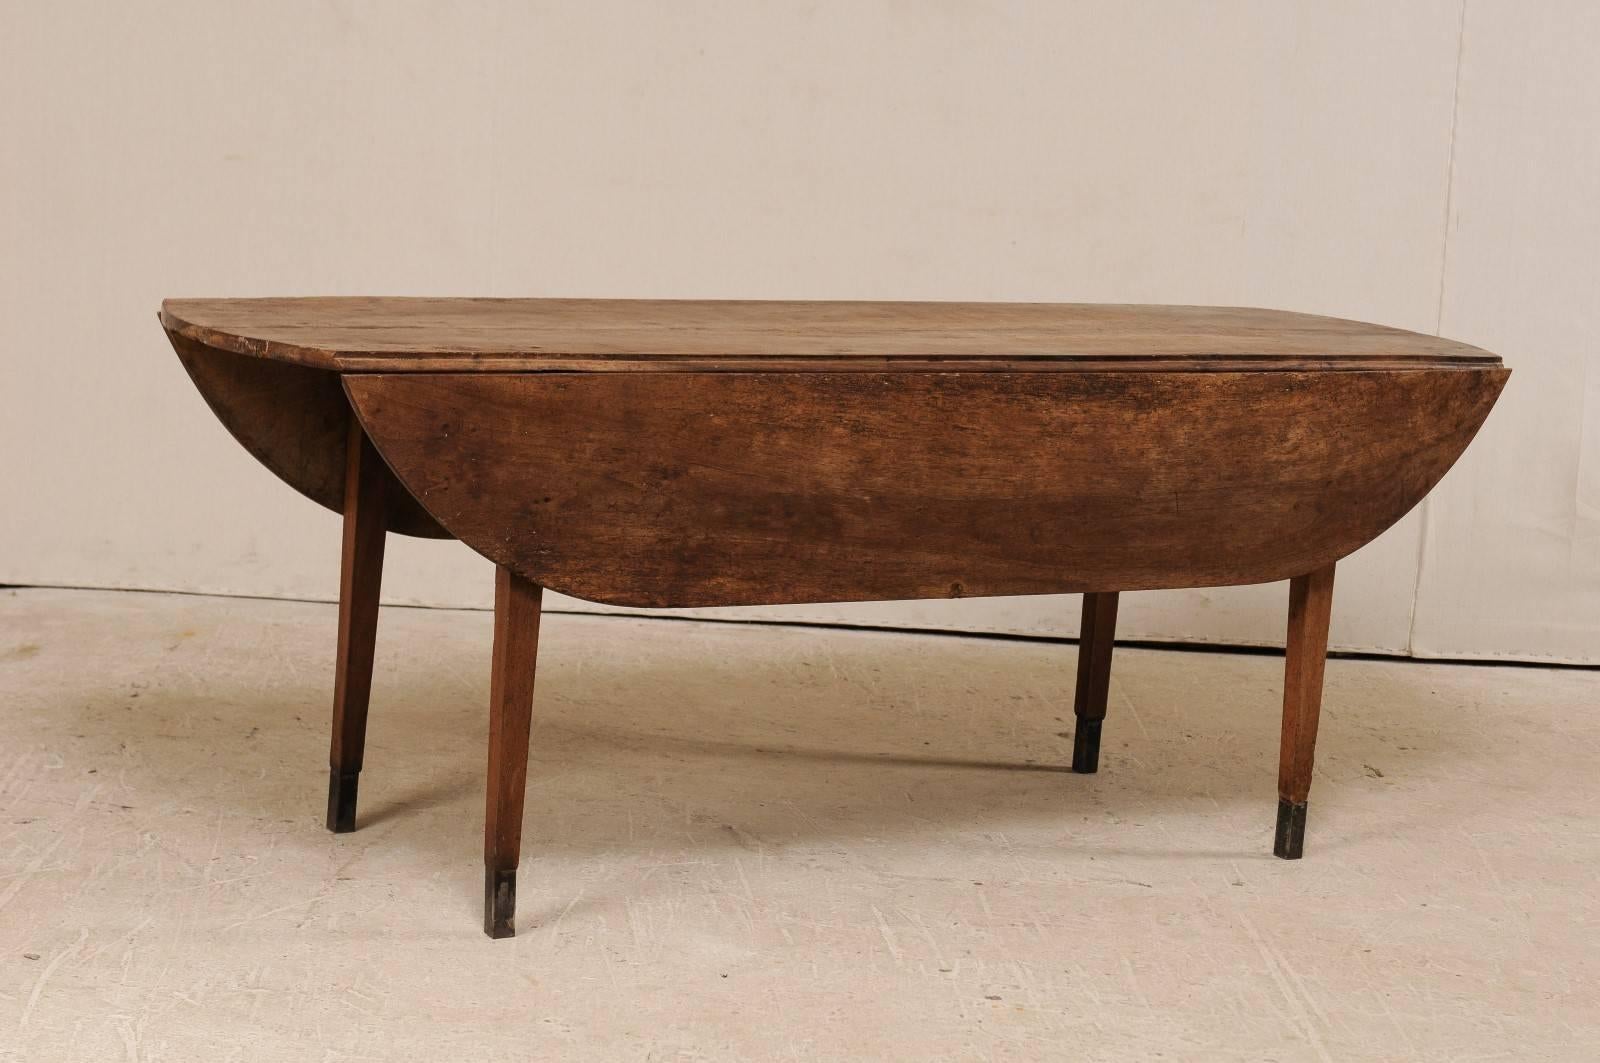 Rustic French Early 19th Century Drop-Leaf Dining Room Table with Elegant Oval Shape